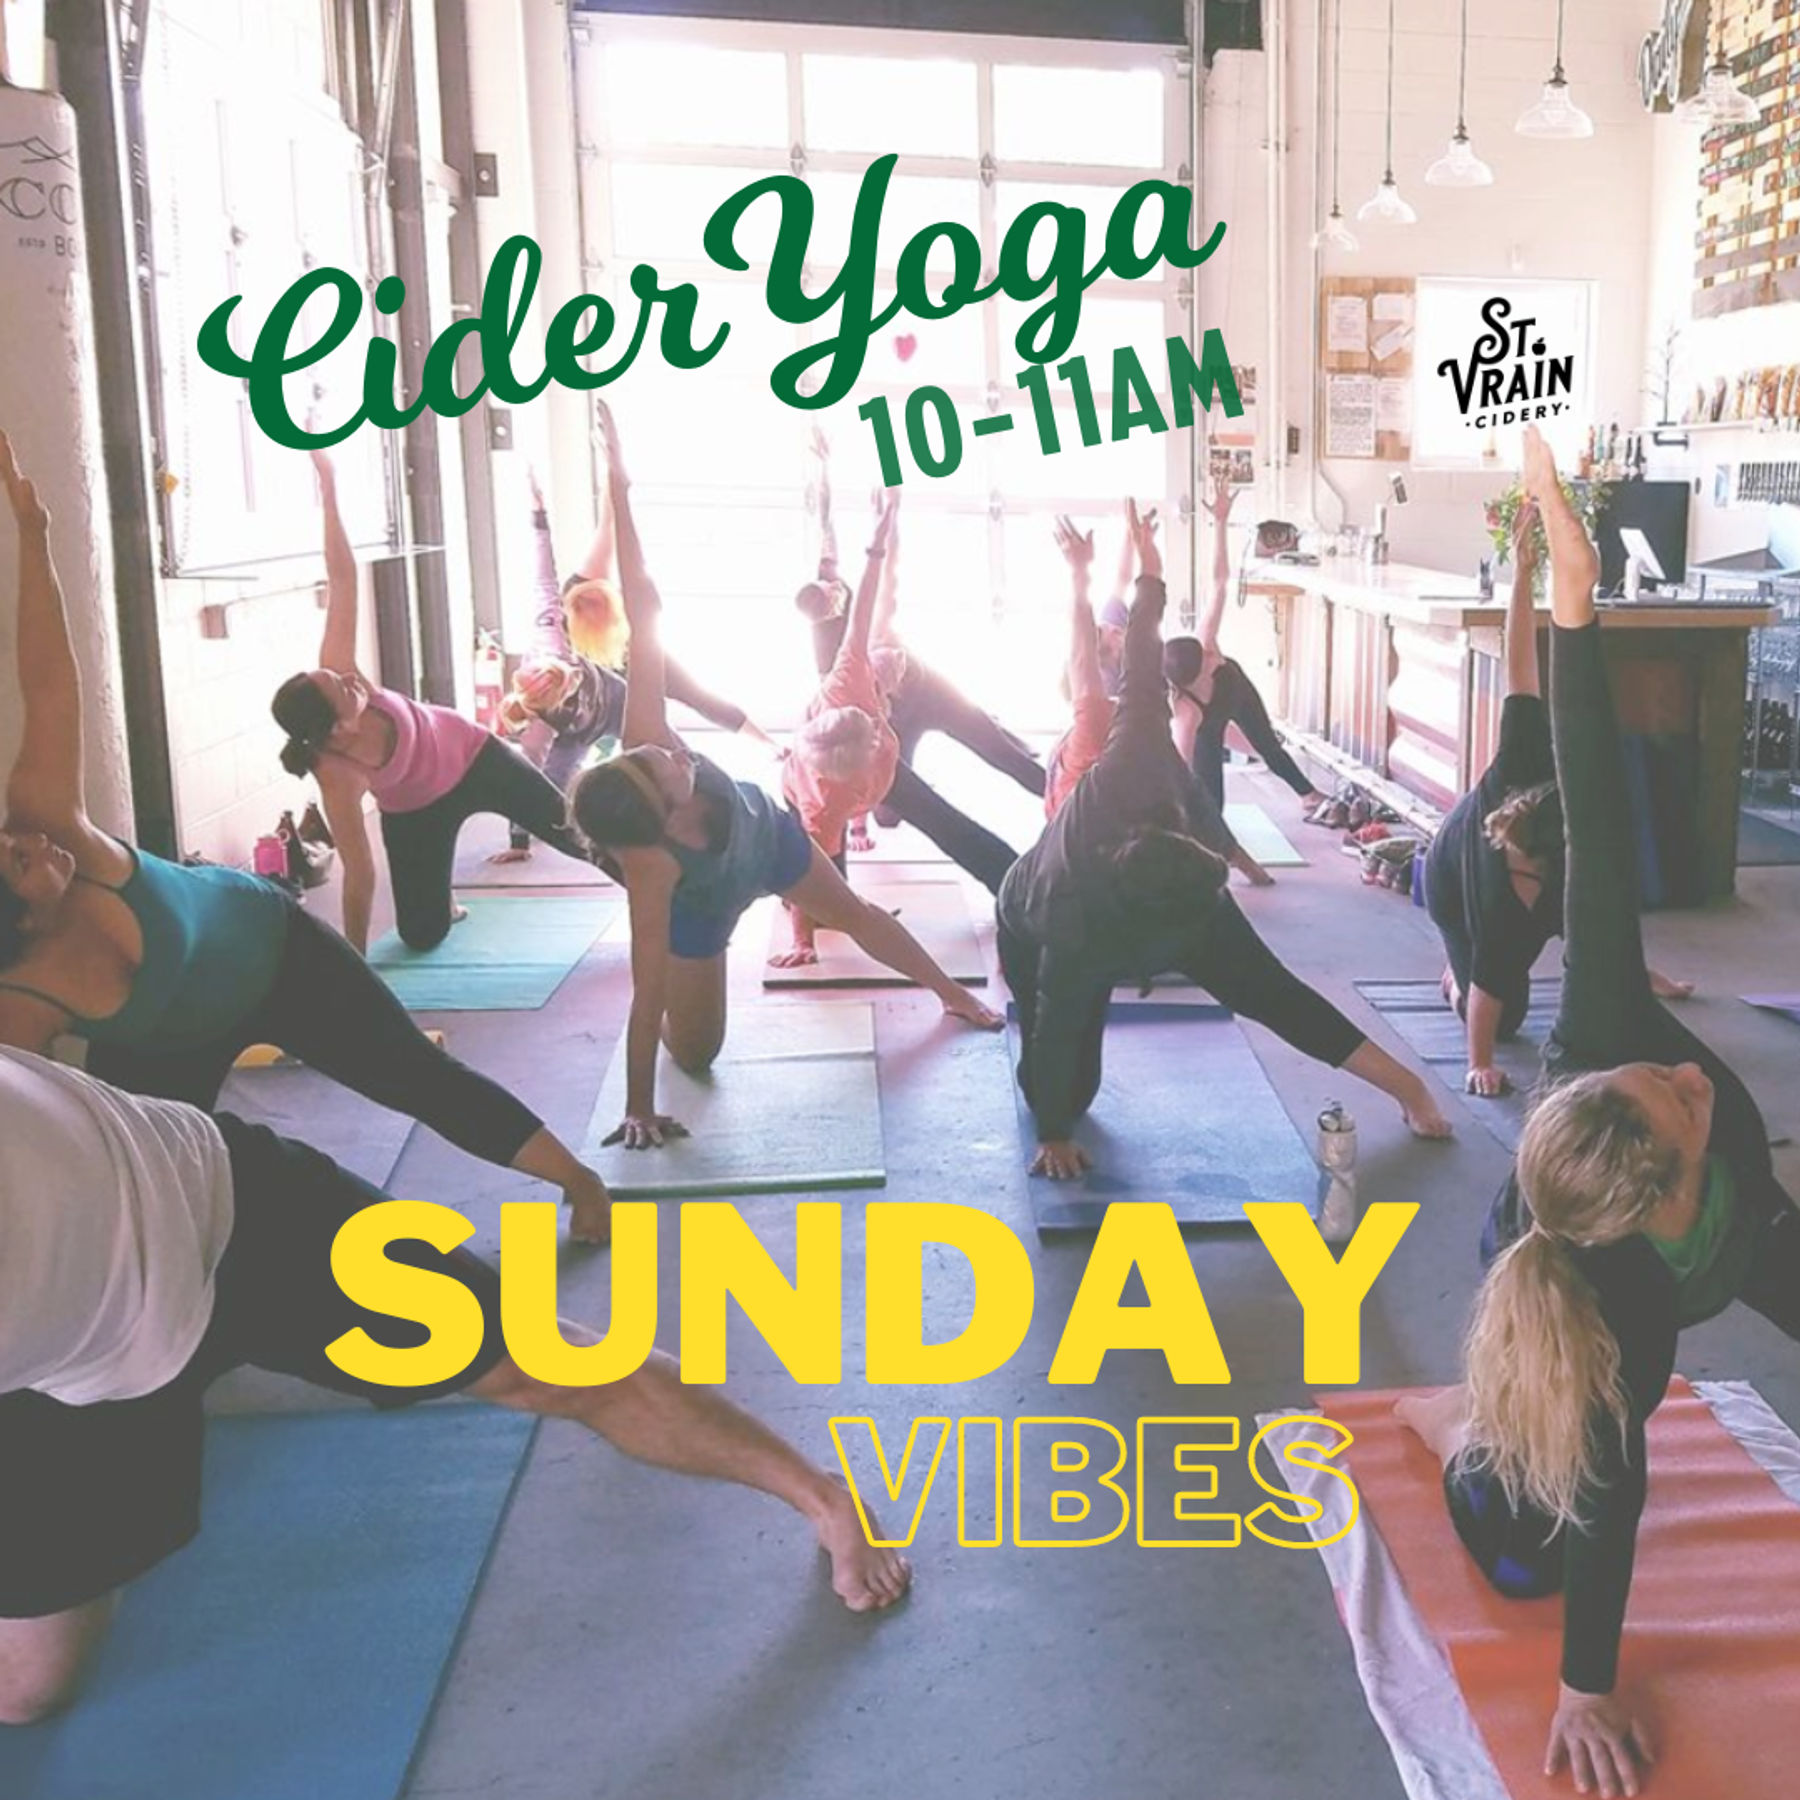 CiderYoga at St. Vrain Cidery